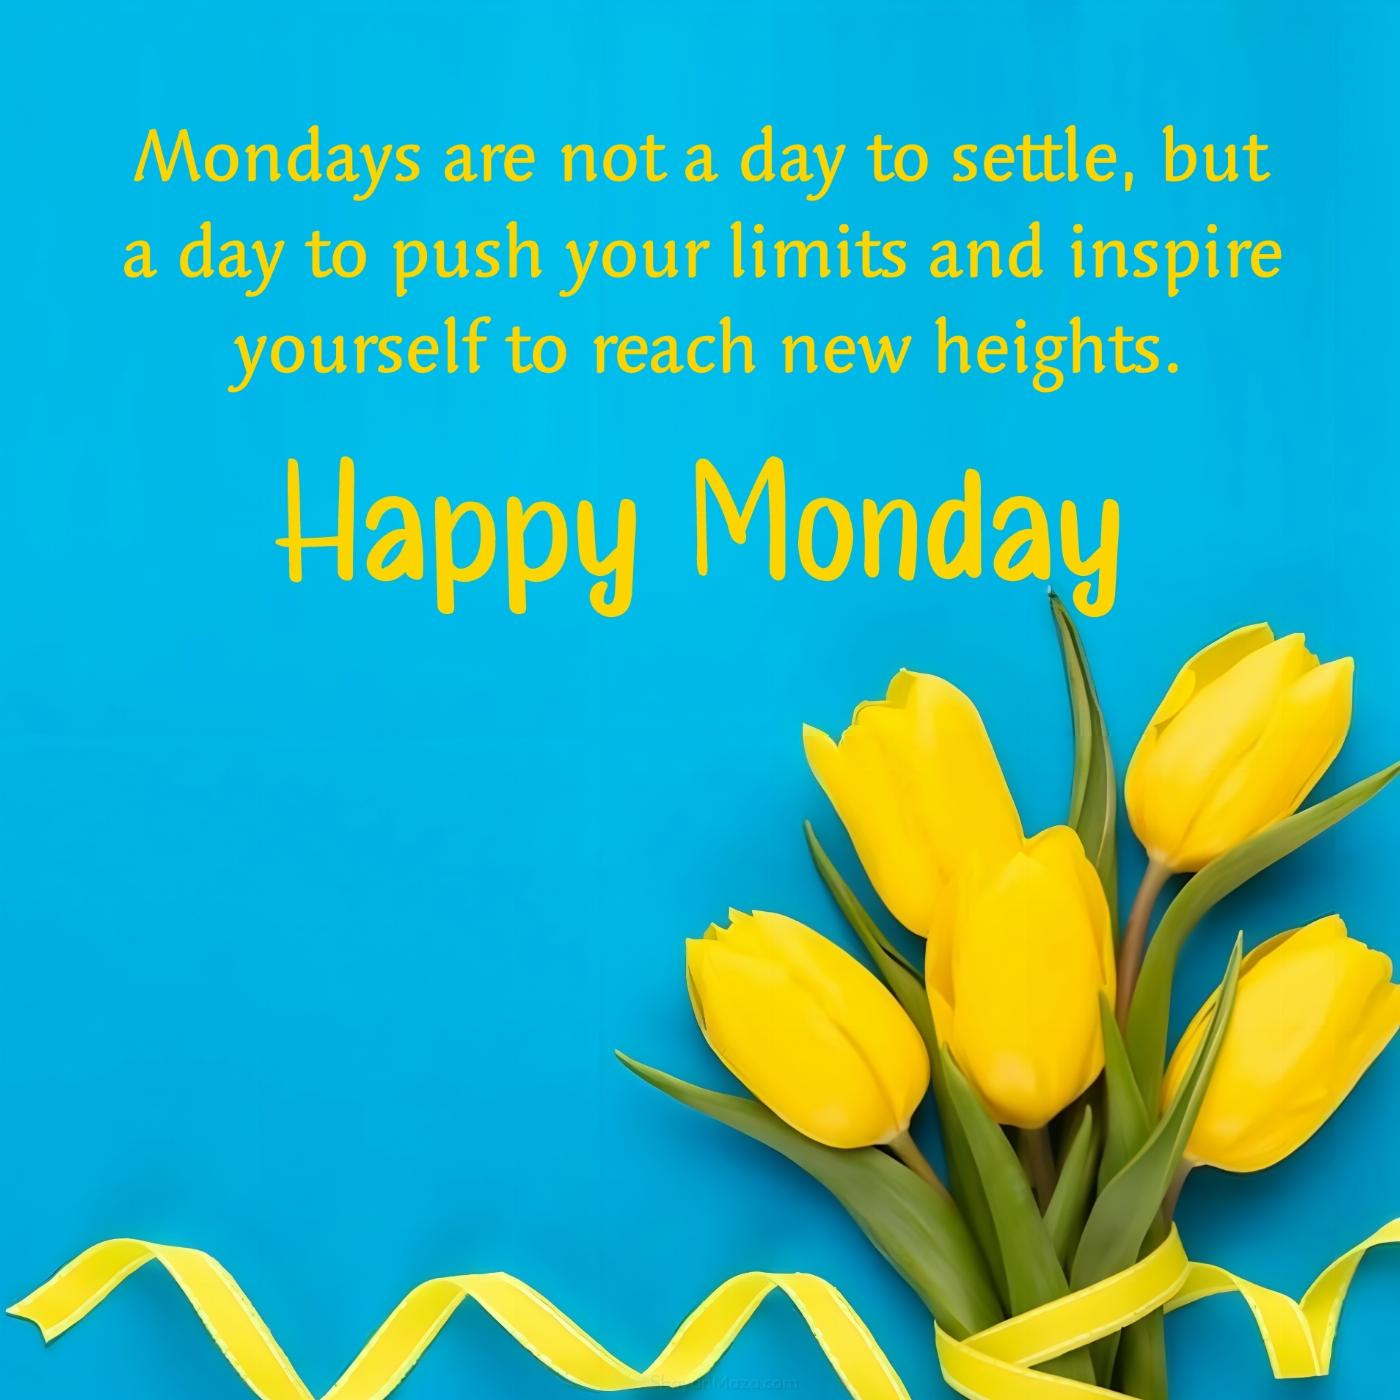 Mondays are not a day to settle but a day to push your limits